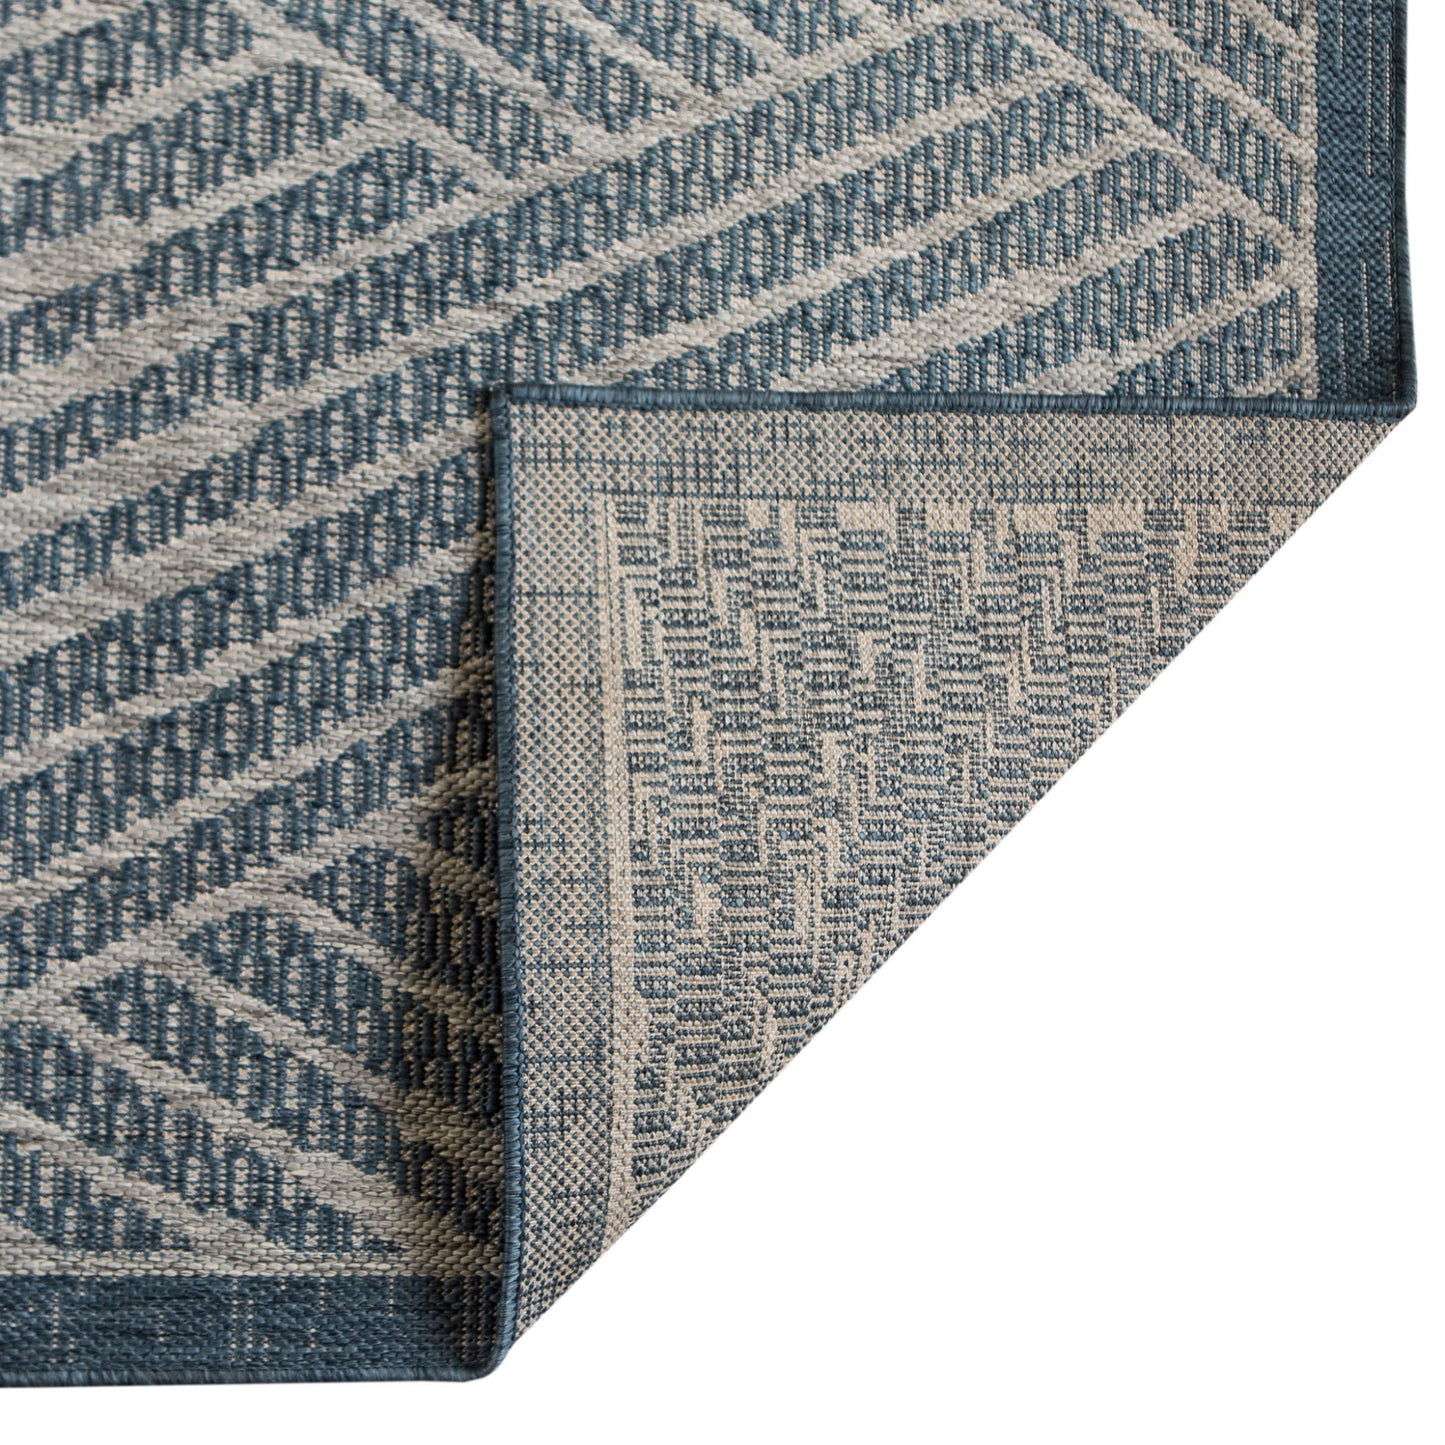 2' x 3' Gray and Blue Geometric Stain Resistant Indoor Outdoor Area Rug